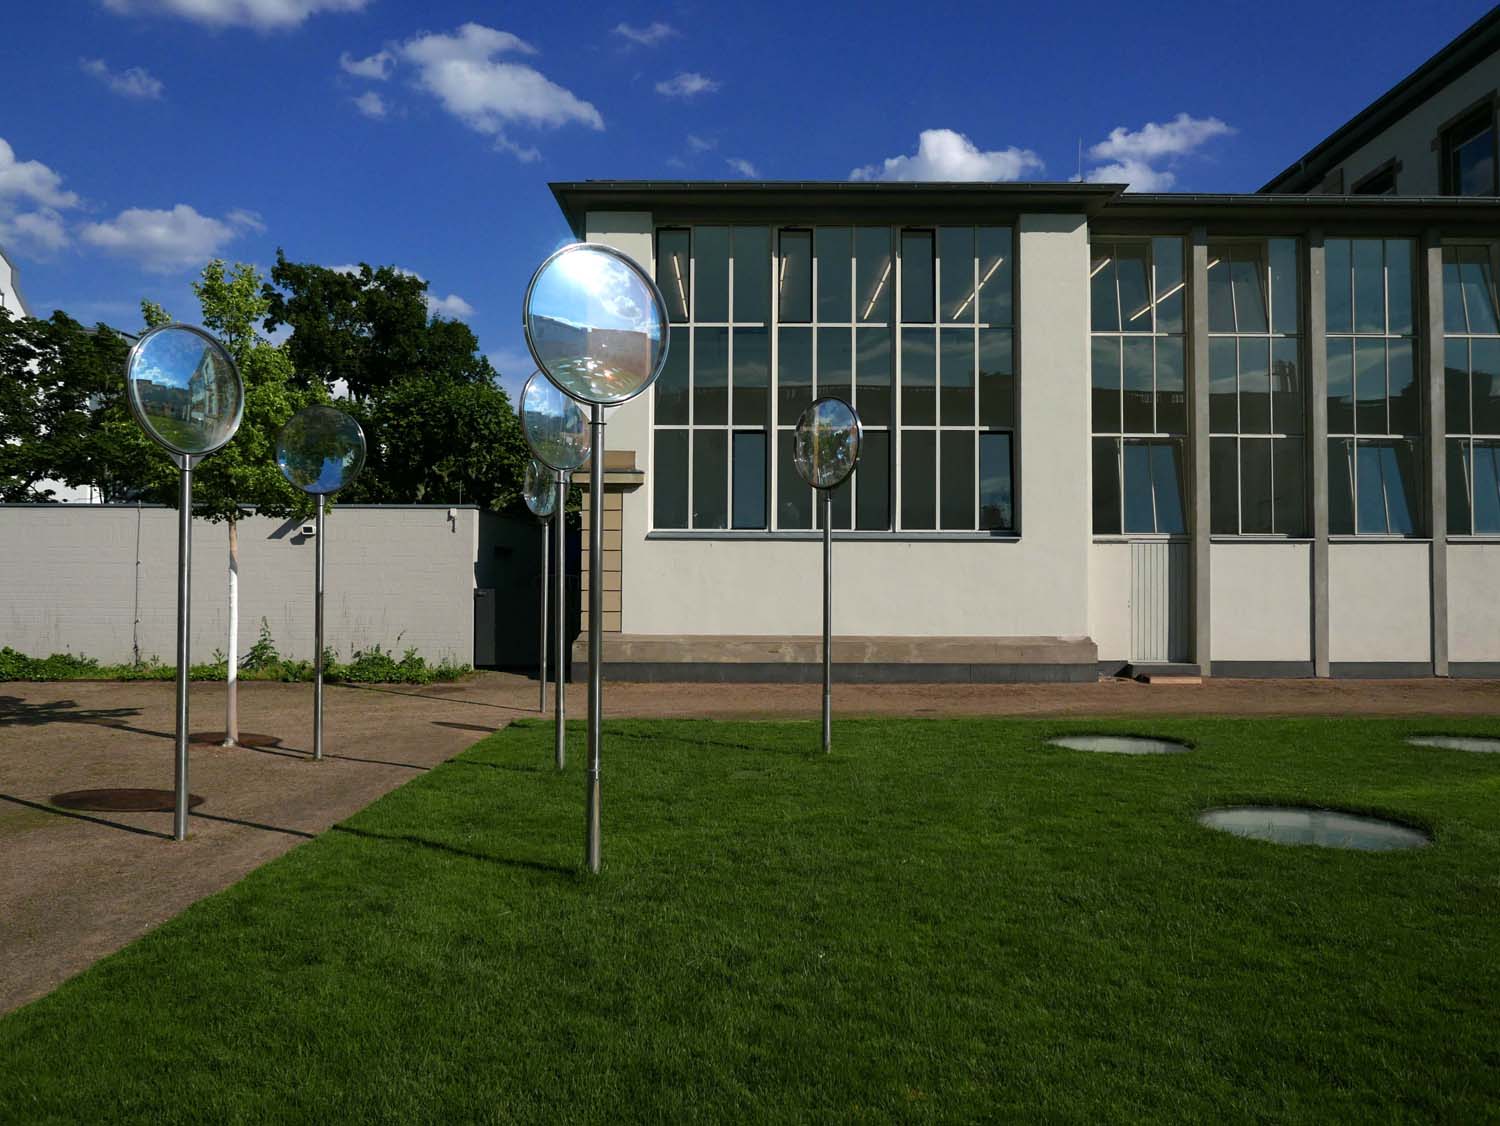 Part of the Städelschule (Städel art school) with the skylights of the contemporary galleries visible in the grass